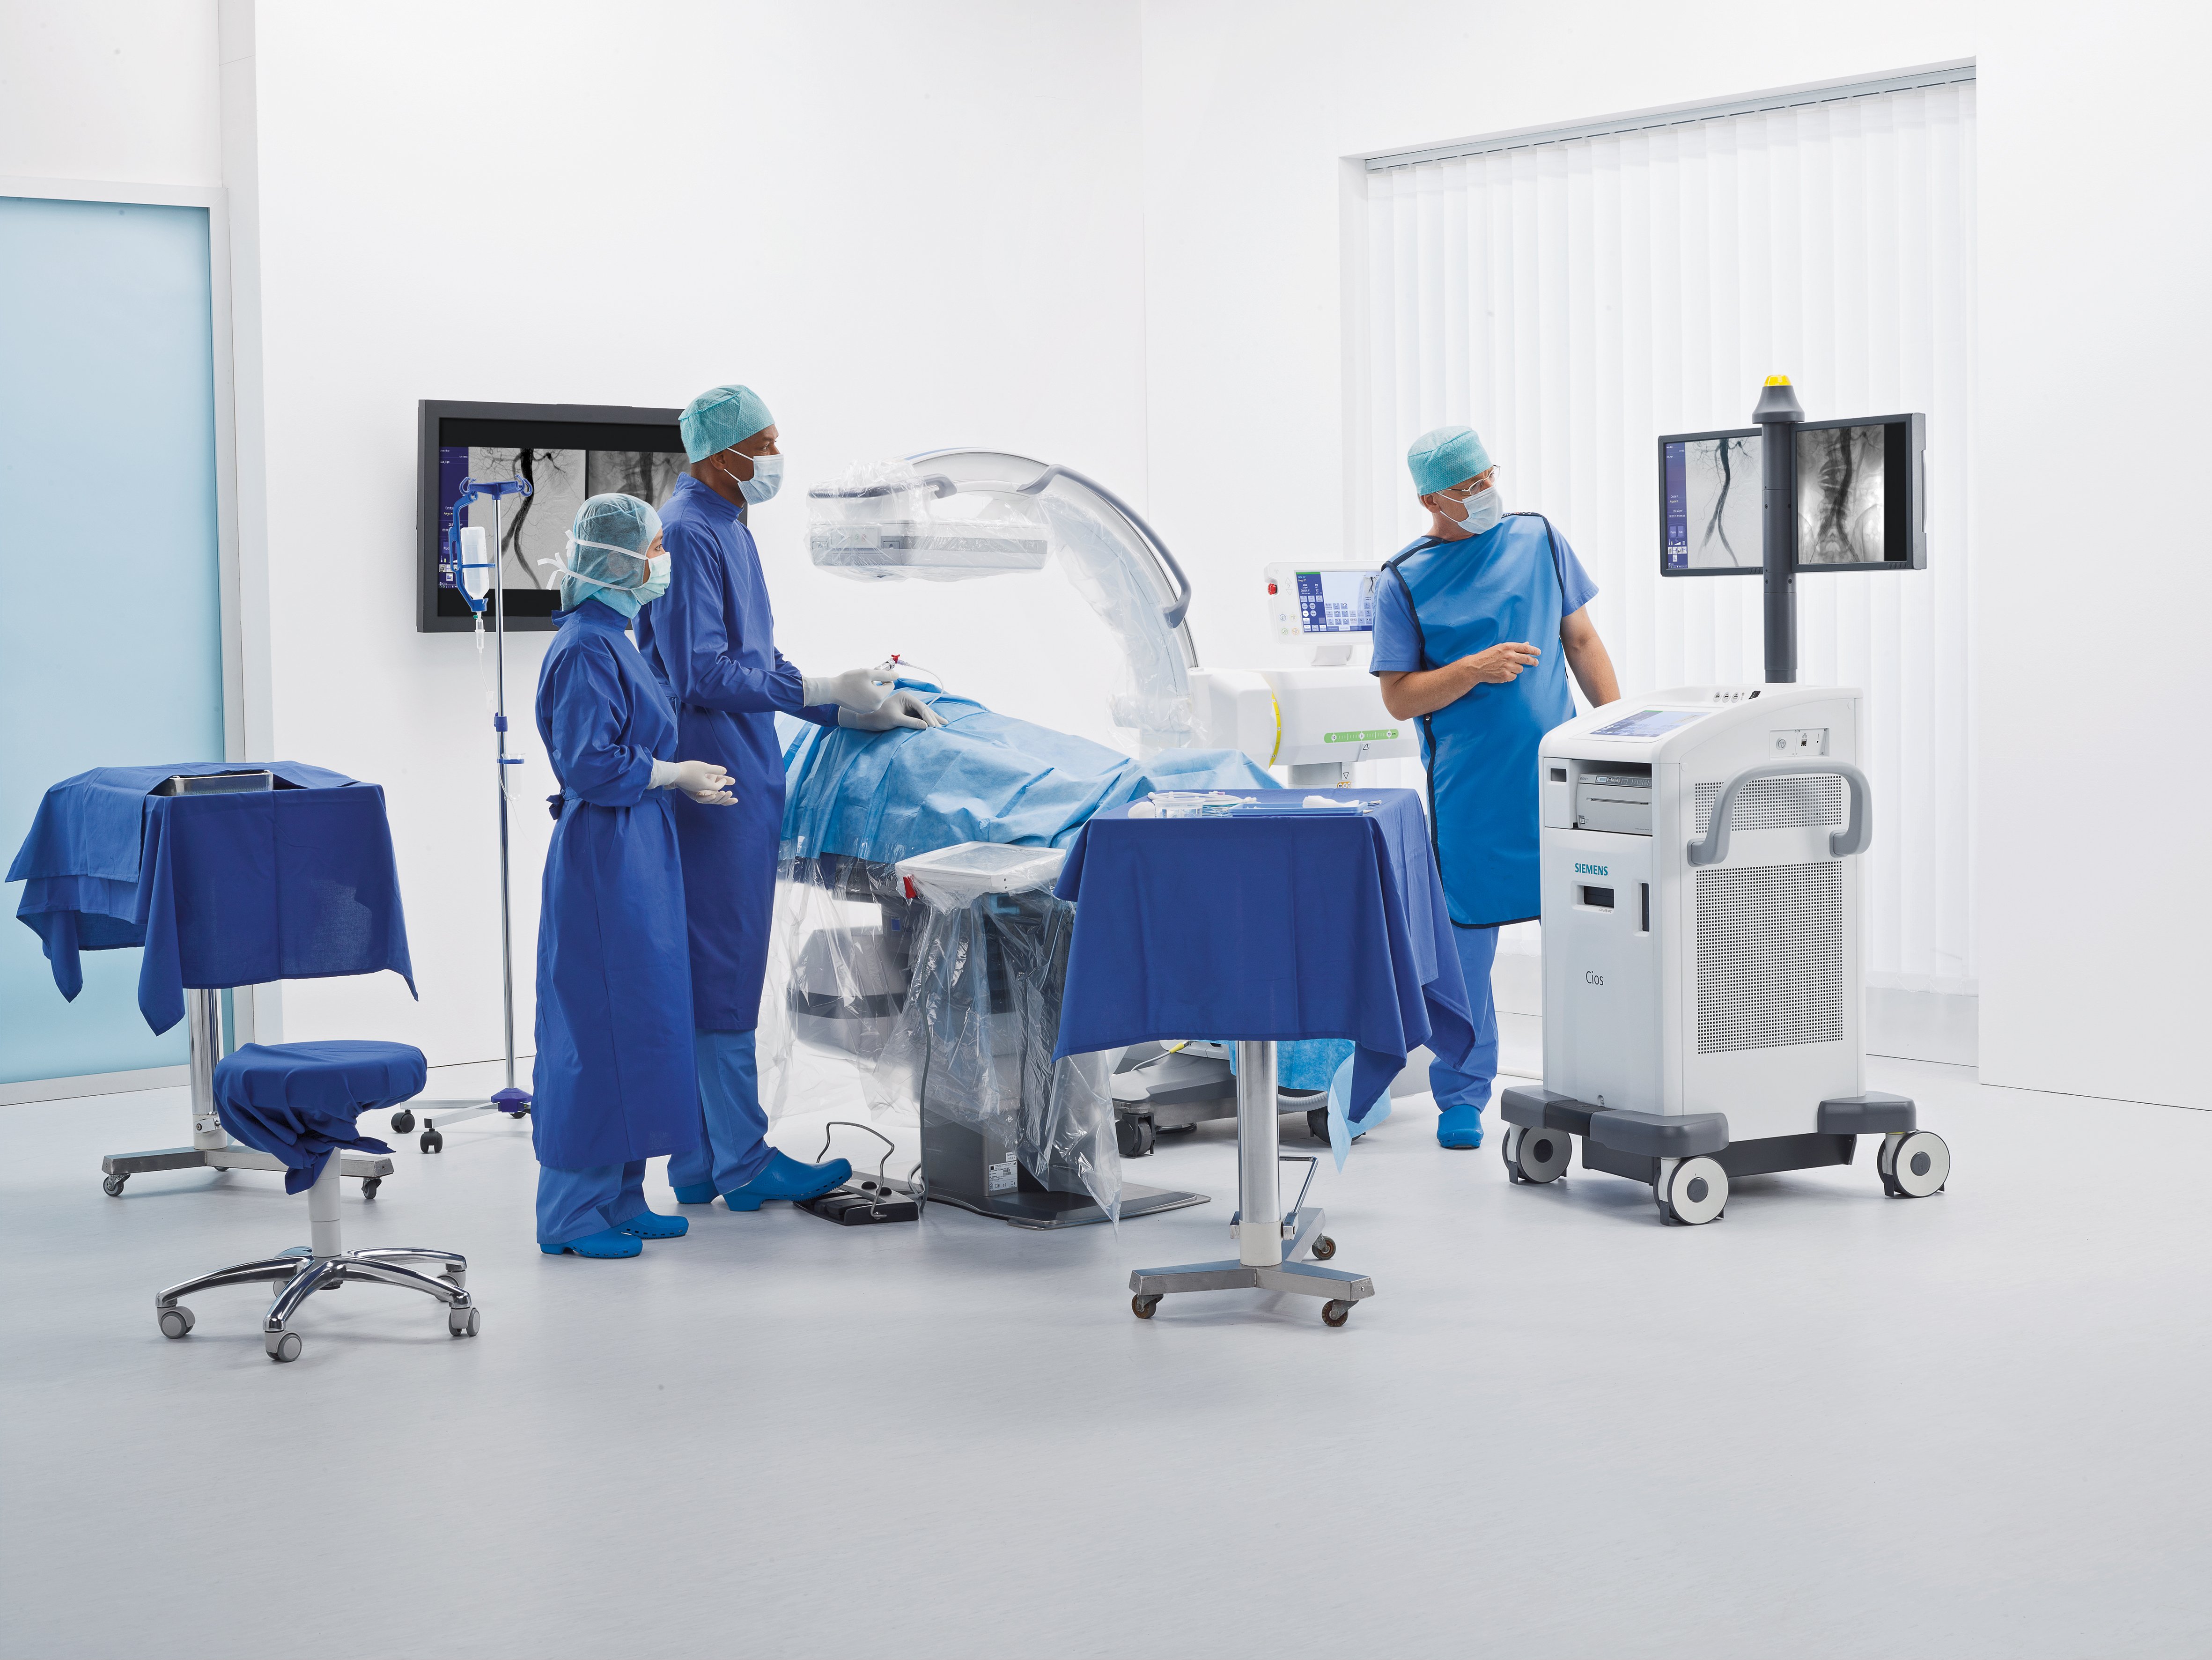 Mobile carm, mobile C-arm, Siemens Cios, mobile c-arms Mobile C-arm fluoroscopic X-ray systems are used for a variety of diagnostic imaging and minimally invasive surgical procedures